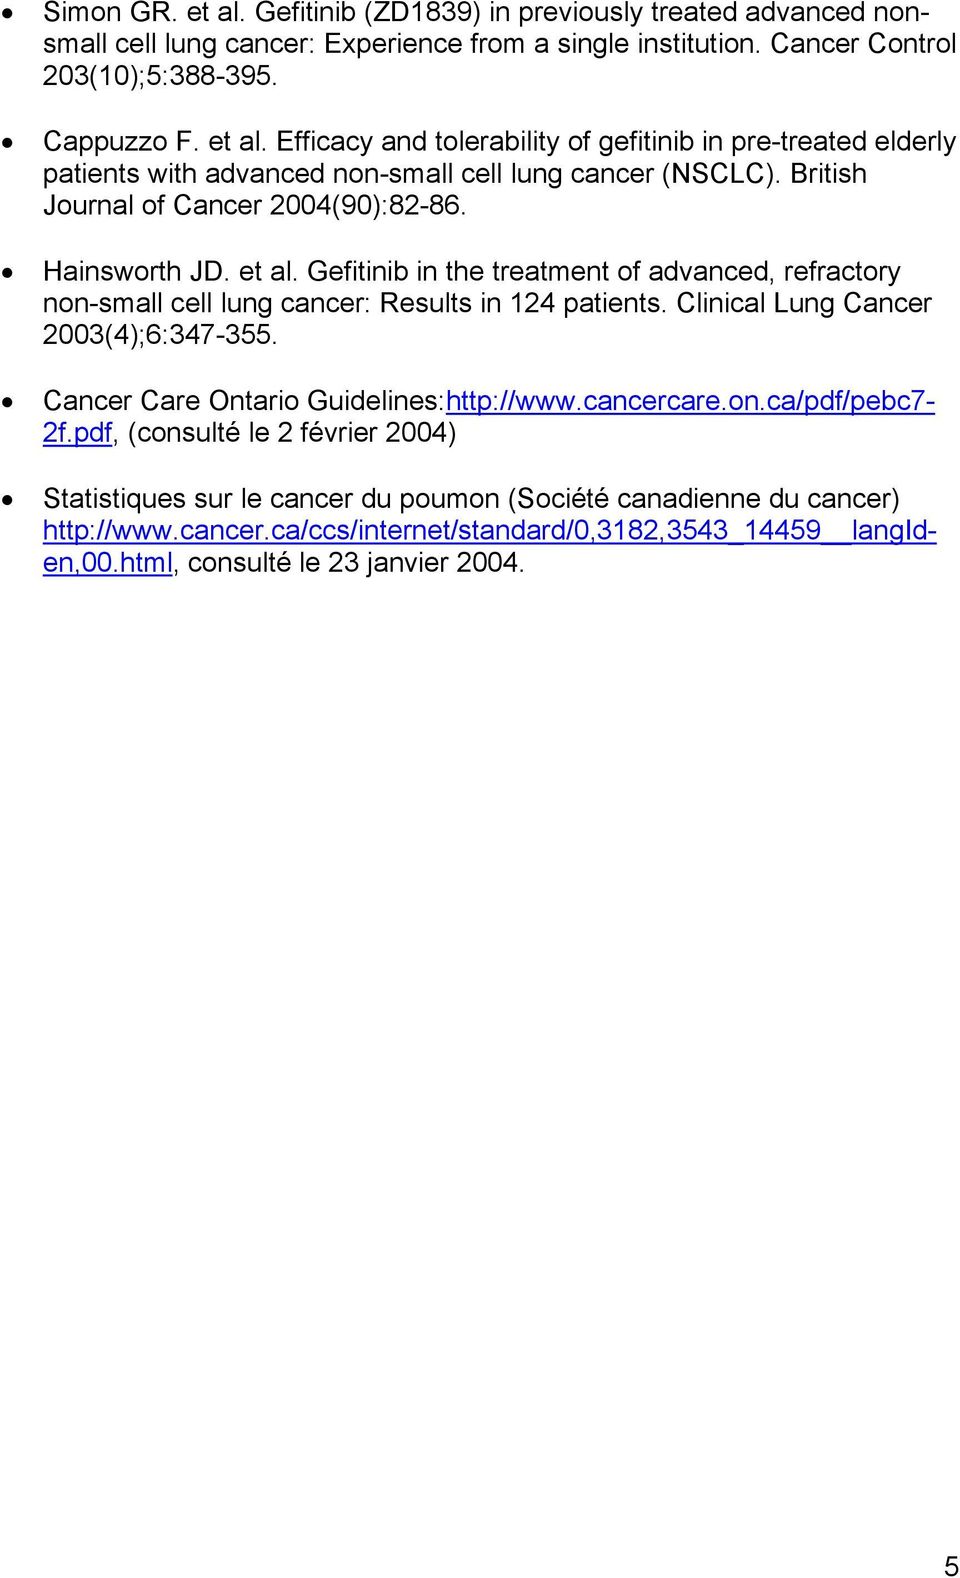 Clinical Lung Cancer 2003(4);6:347-355. Cancer Care Ontario Guidelines:http://www.cancercare.on.ca/pdf/pebc7-2f.